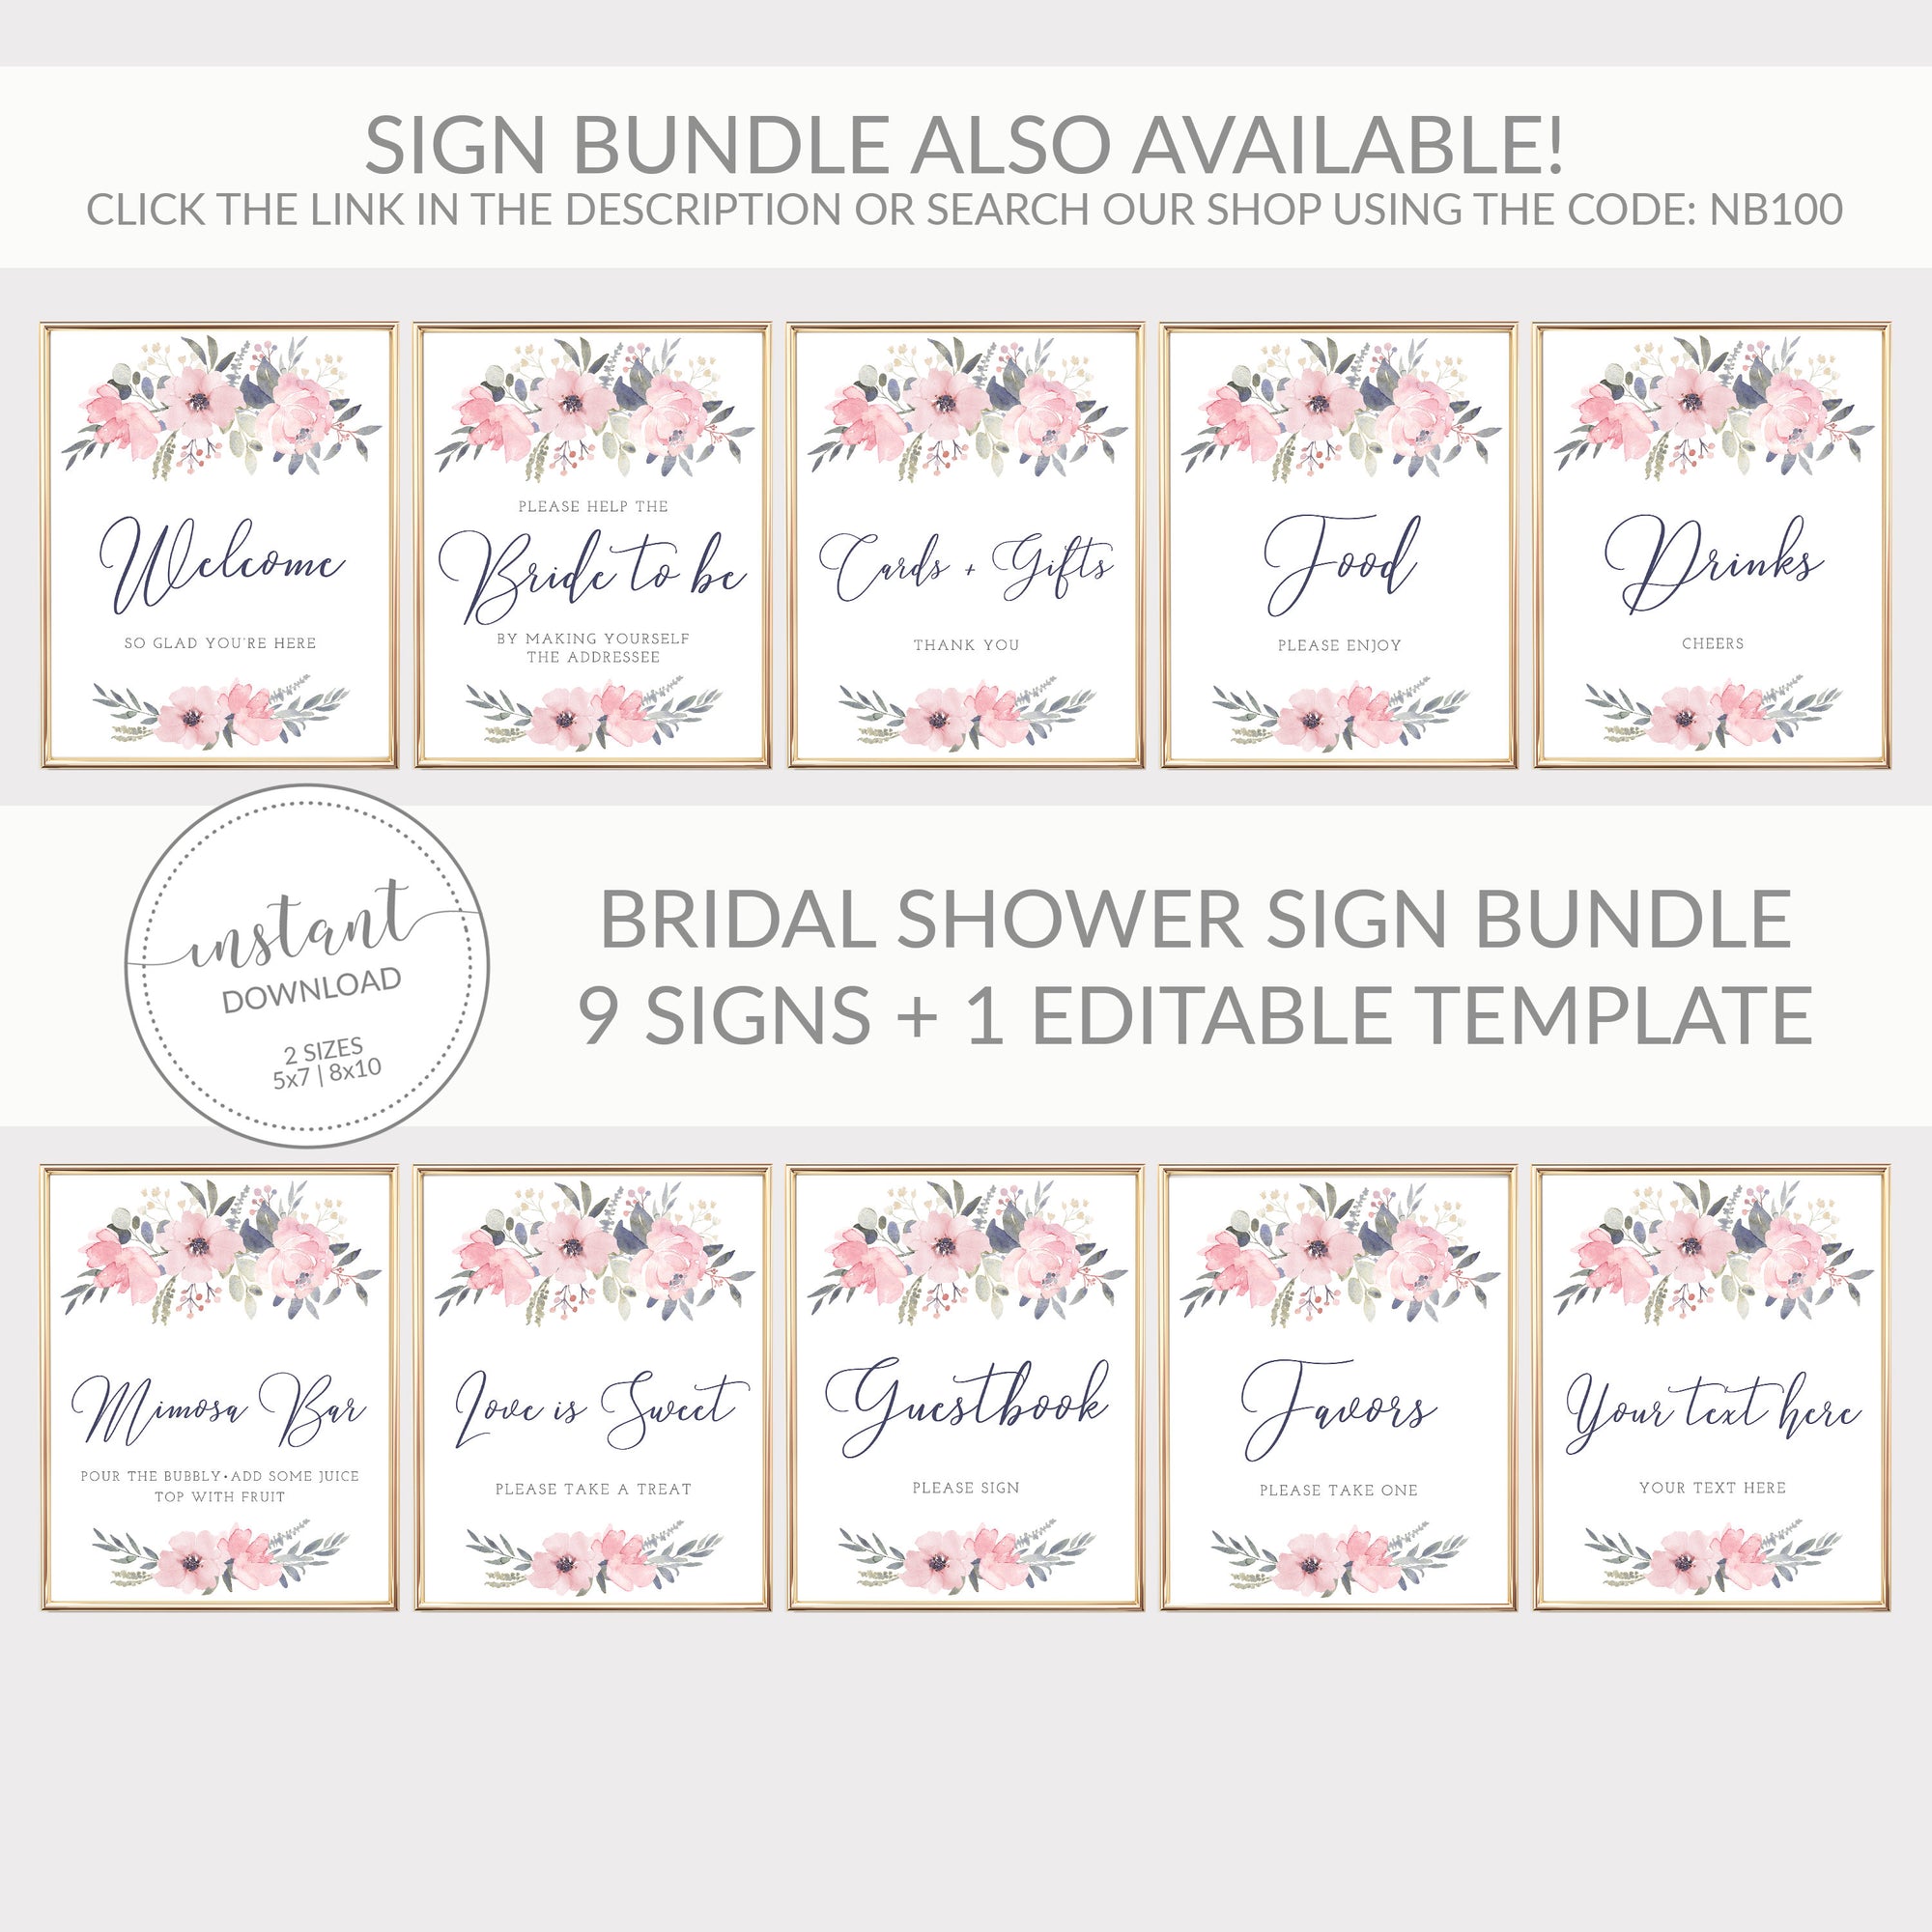 Navy and Blush Floral Printable Guestbook Sign INSTANT DOWNLOAD, Birthday, Bridal Shower, Baby Shower, Wedding Decorations Supplies - NB100 - @PlumPolkaDot 